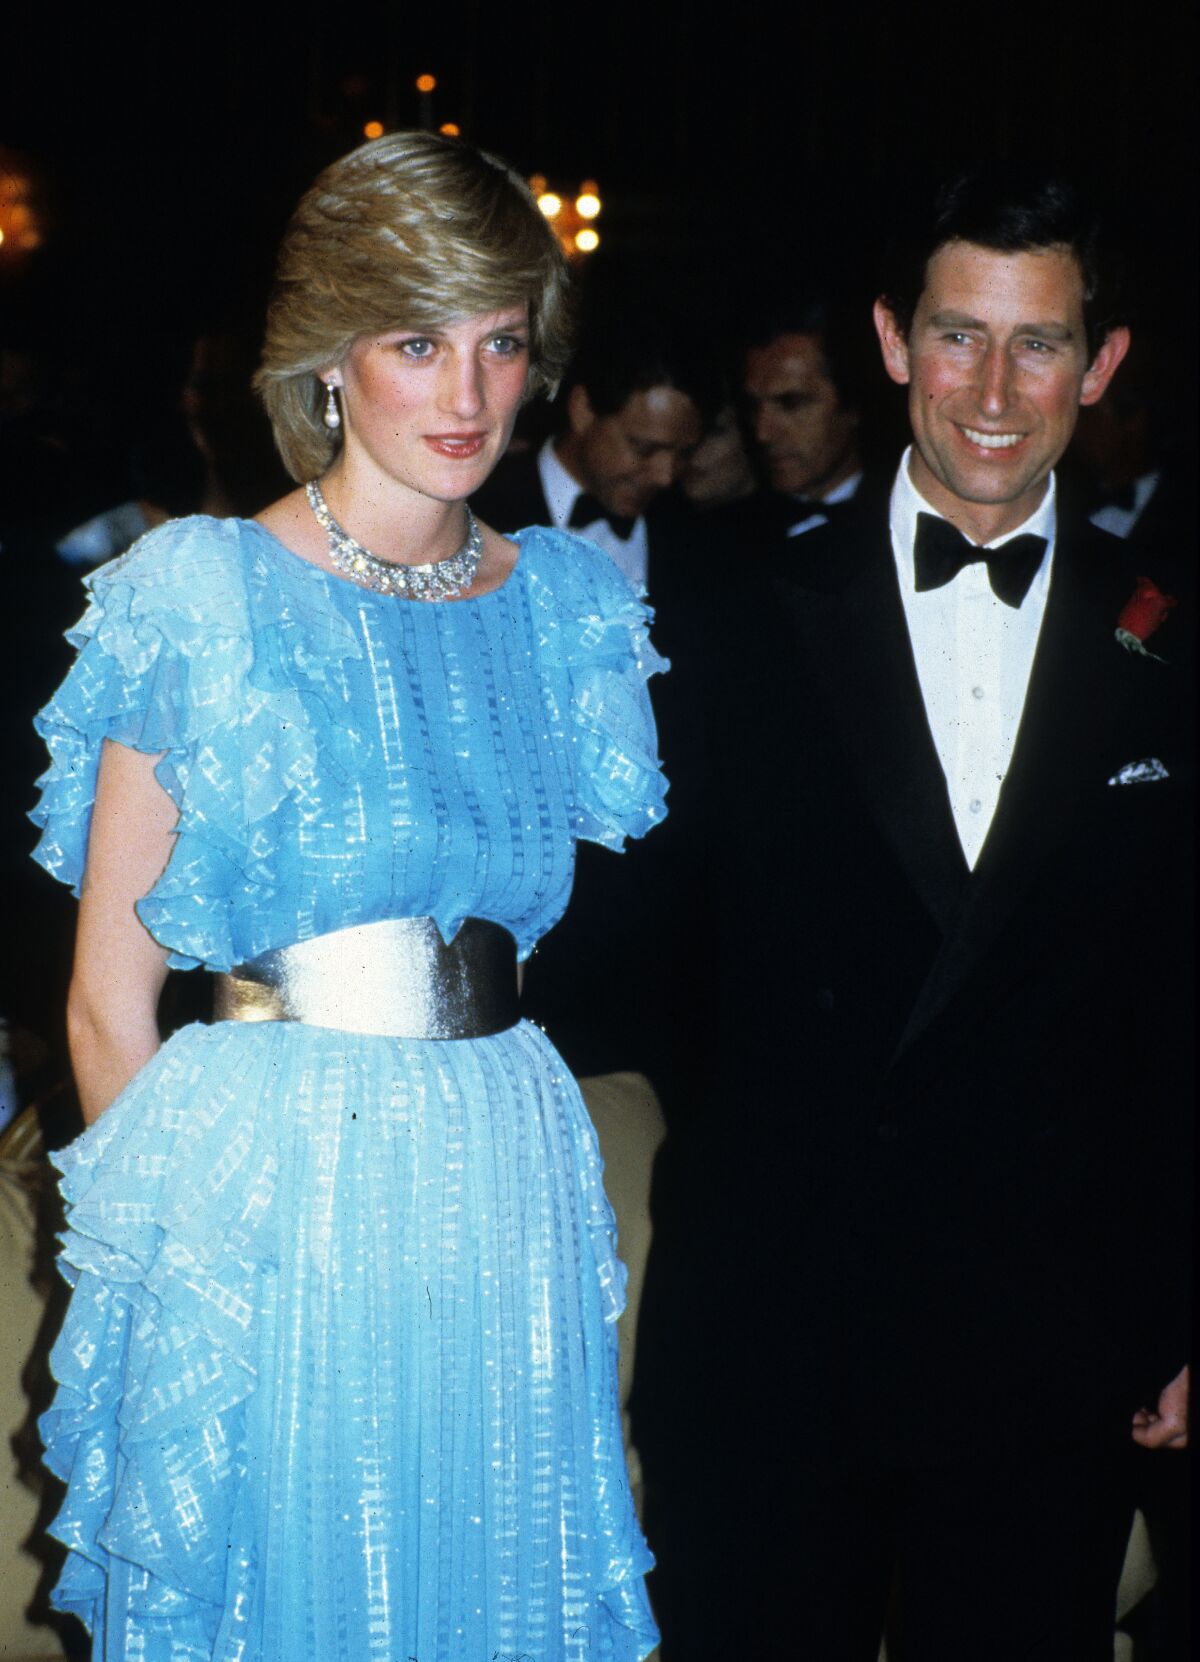 March 1983: Princess Diana with Prince of Wales. A shimmery blue dress by Bruce Oldfield reflects her growing fashion sense.